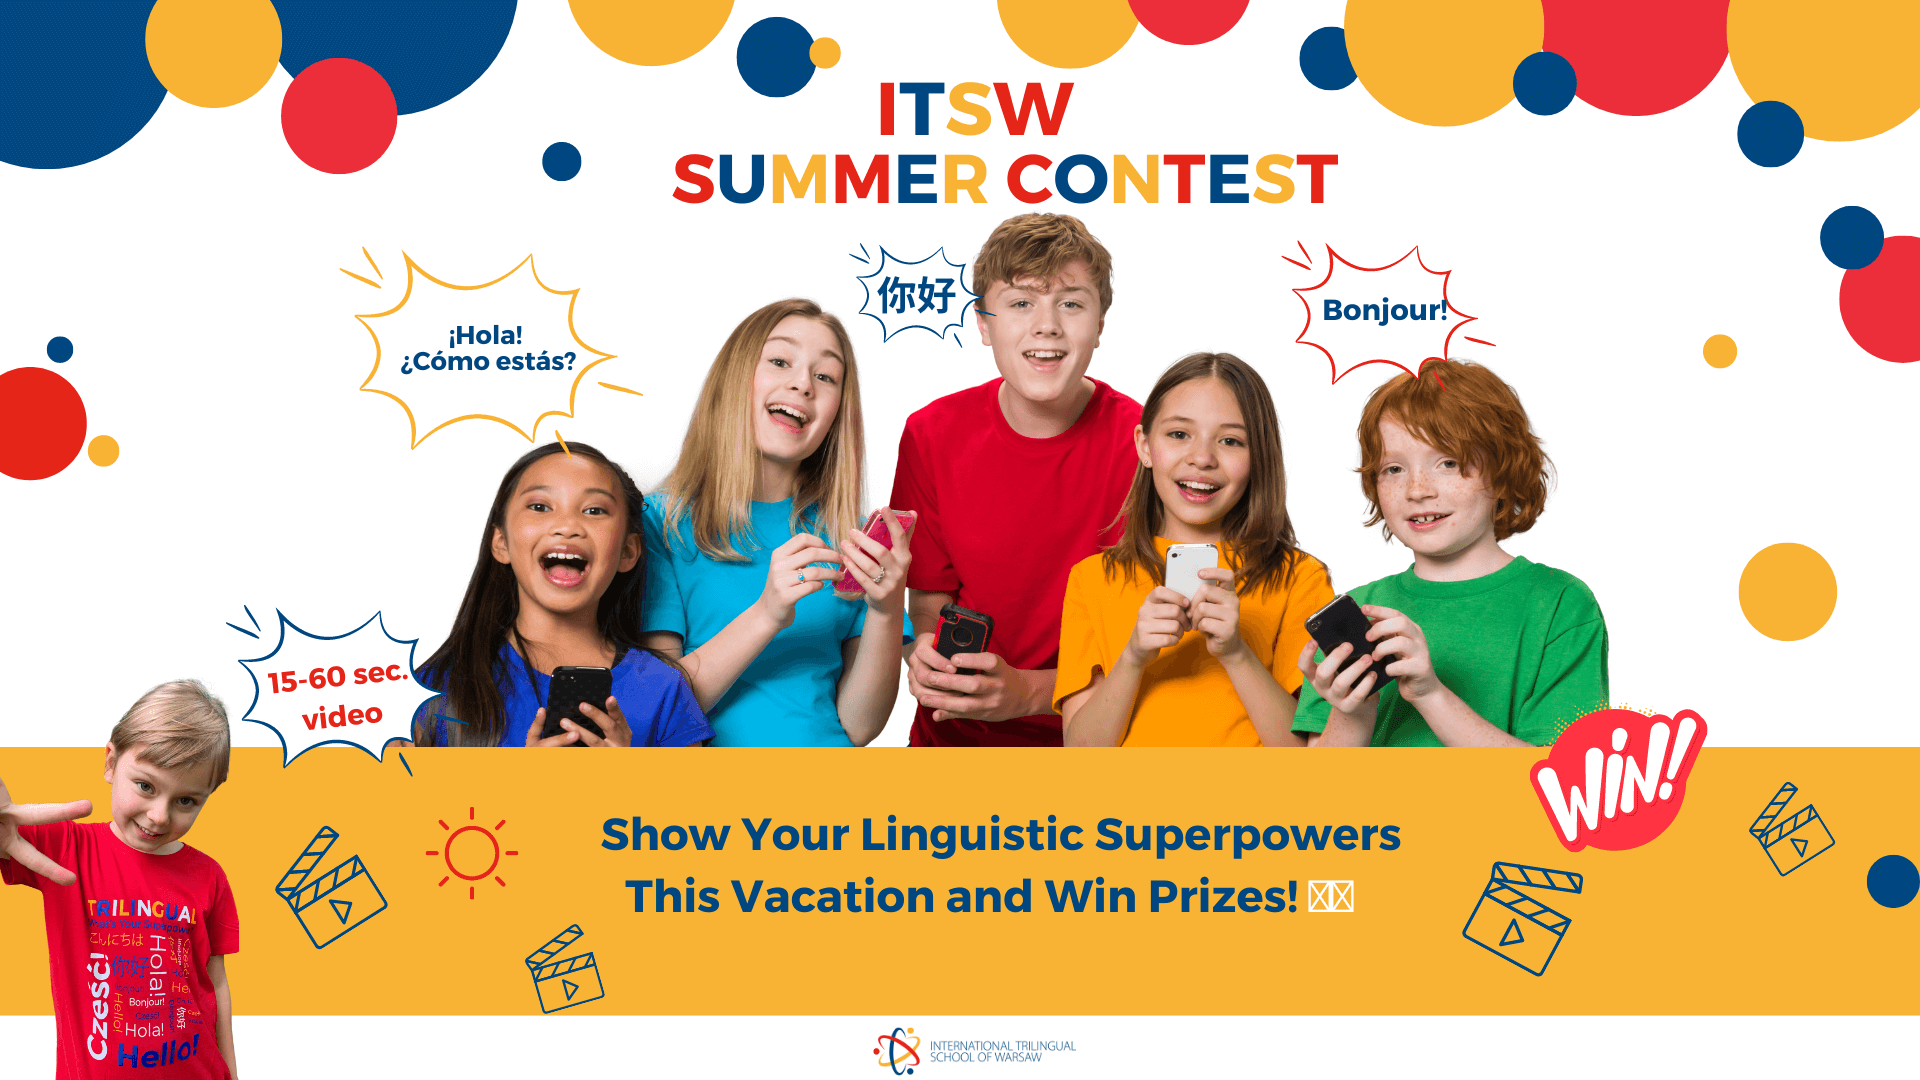 This summer show your linguistic skills and win prizes!